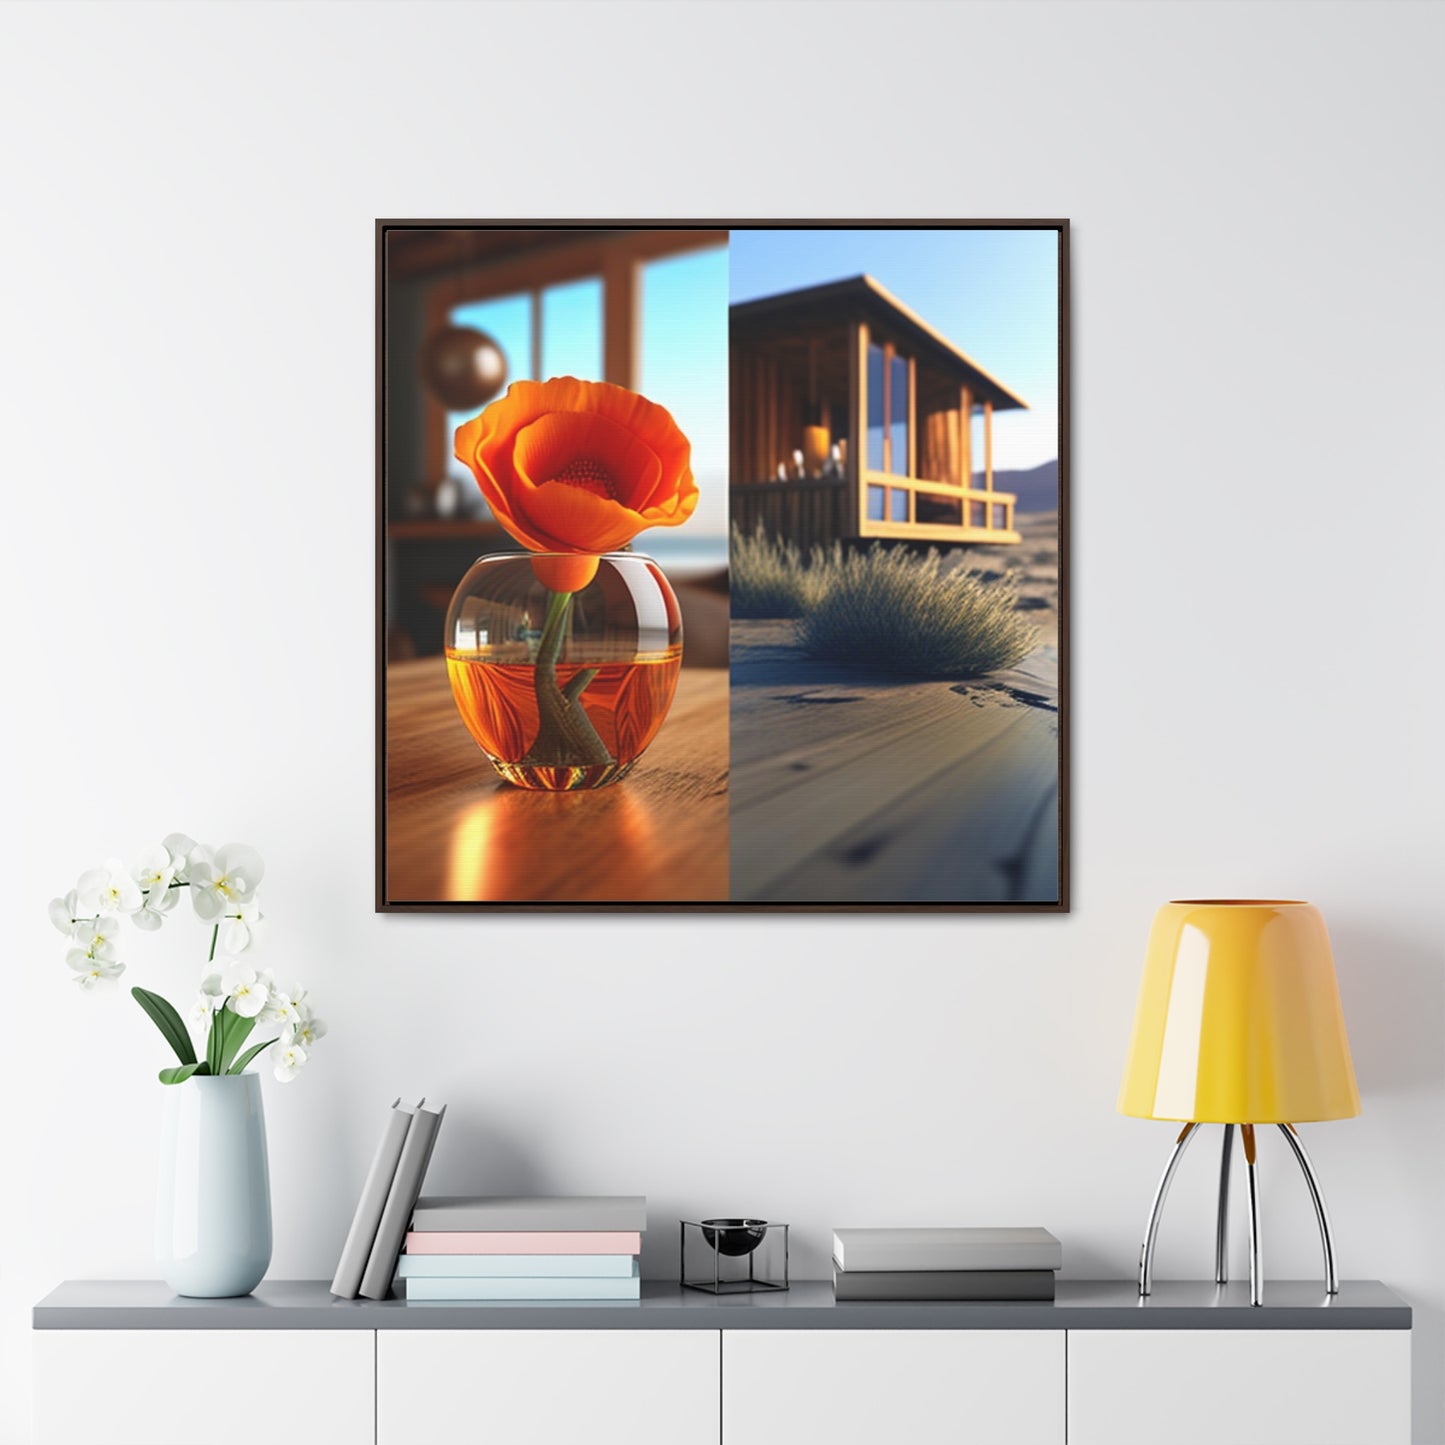 Gallery Canvas Wraps, Square Frame Poppy in a Glass Vase 3